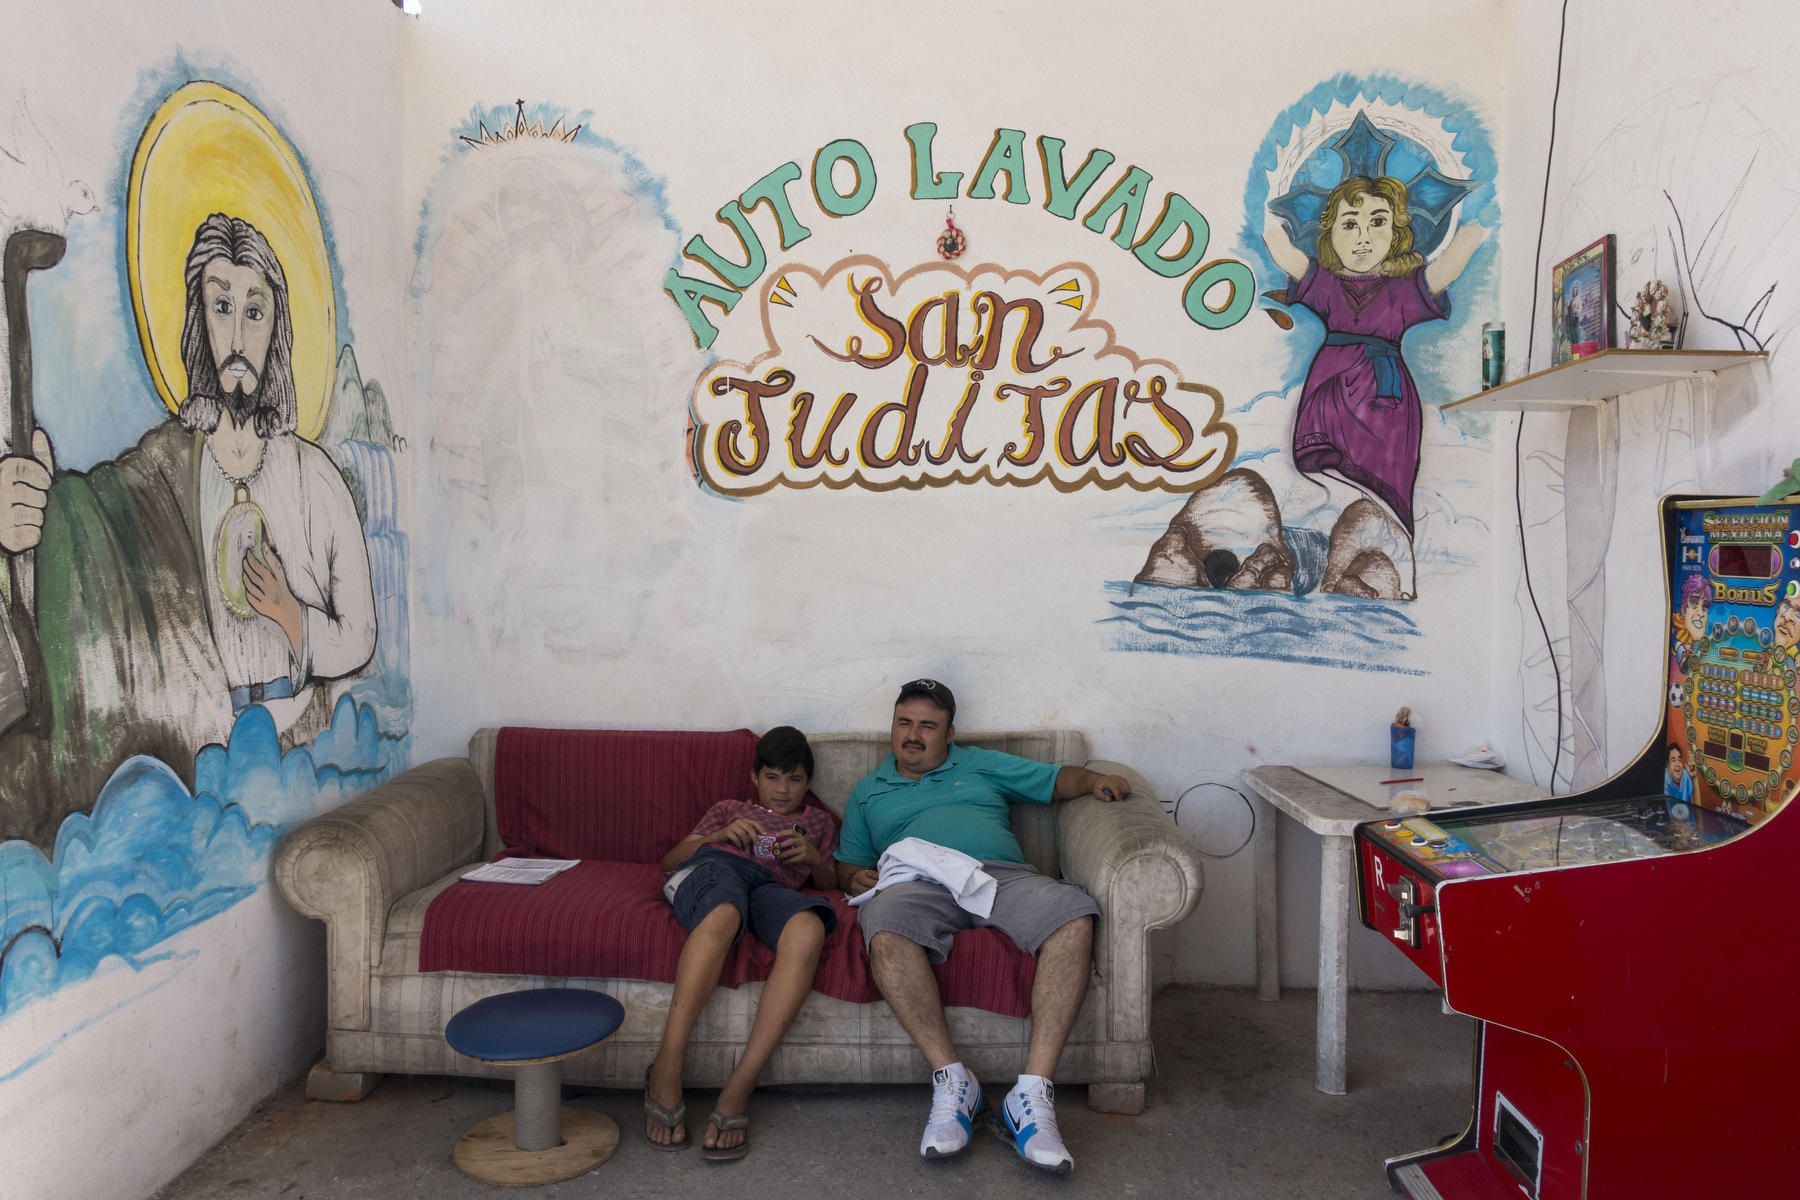 A father and son resting on sofa surrounded by religious murals at a car-wash.
 : PUERTO VALLARTA - Wall Art & Bicycle Tour : Viviane Moos |  Documentary Photographer